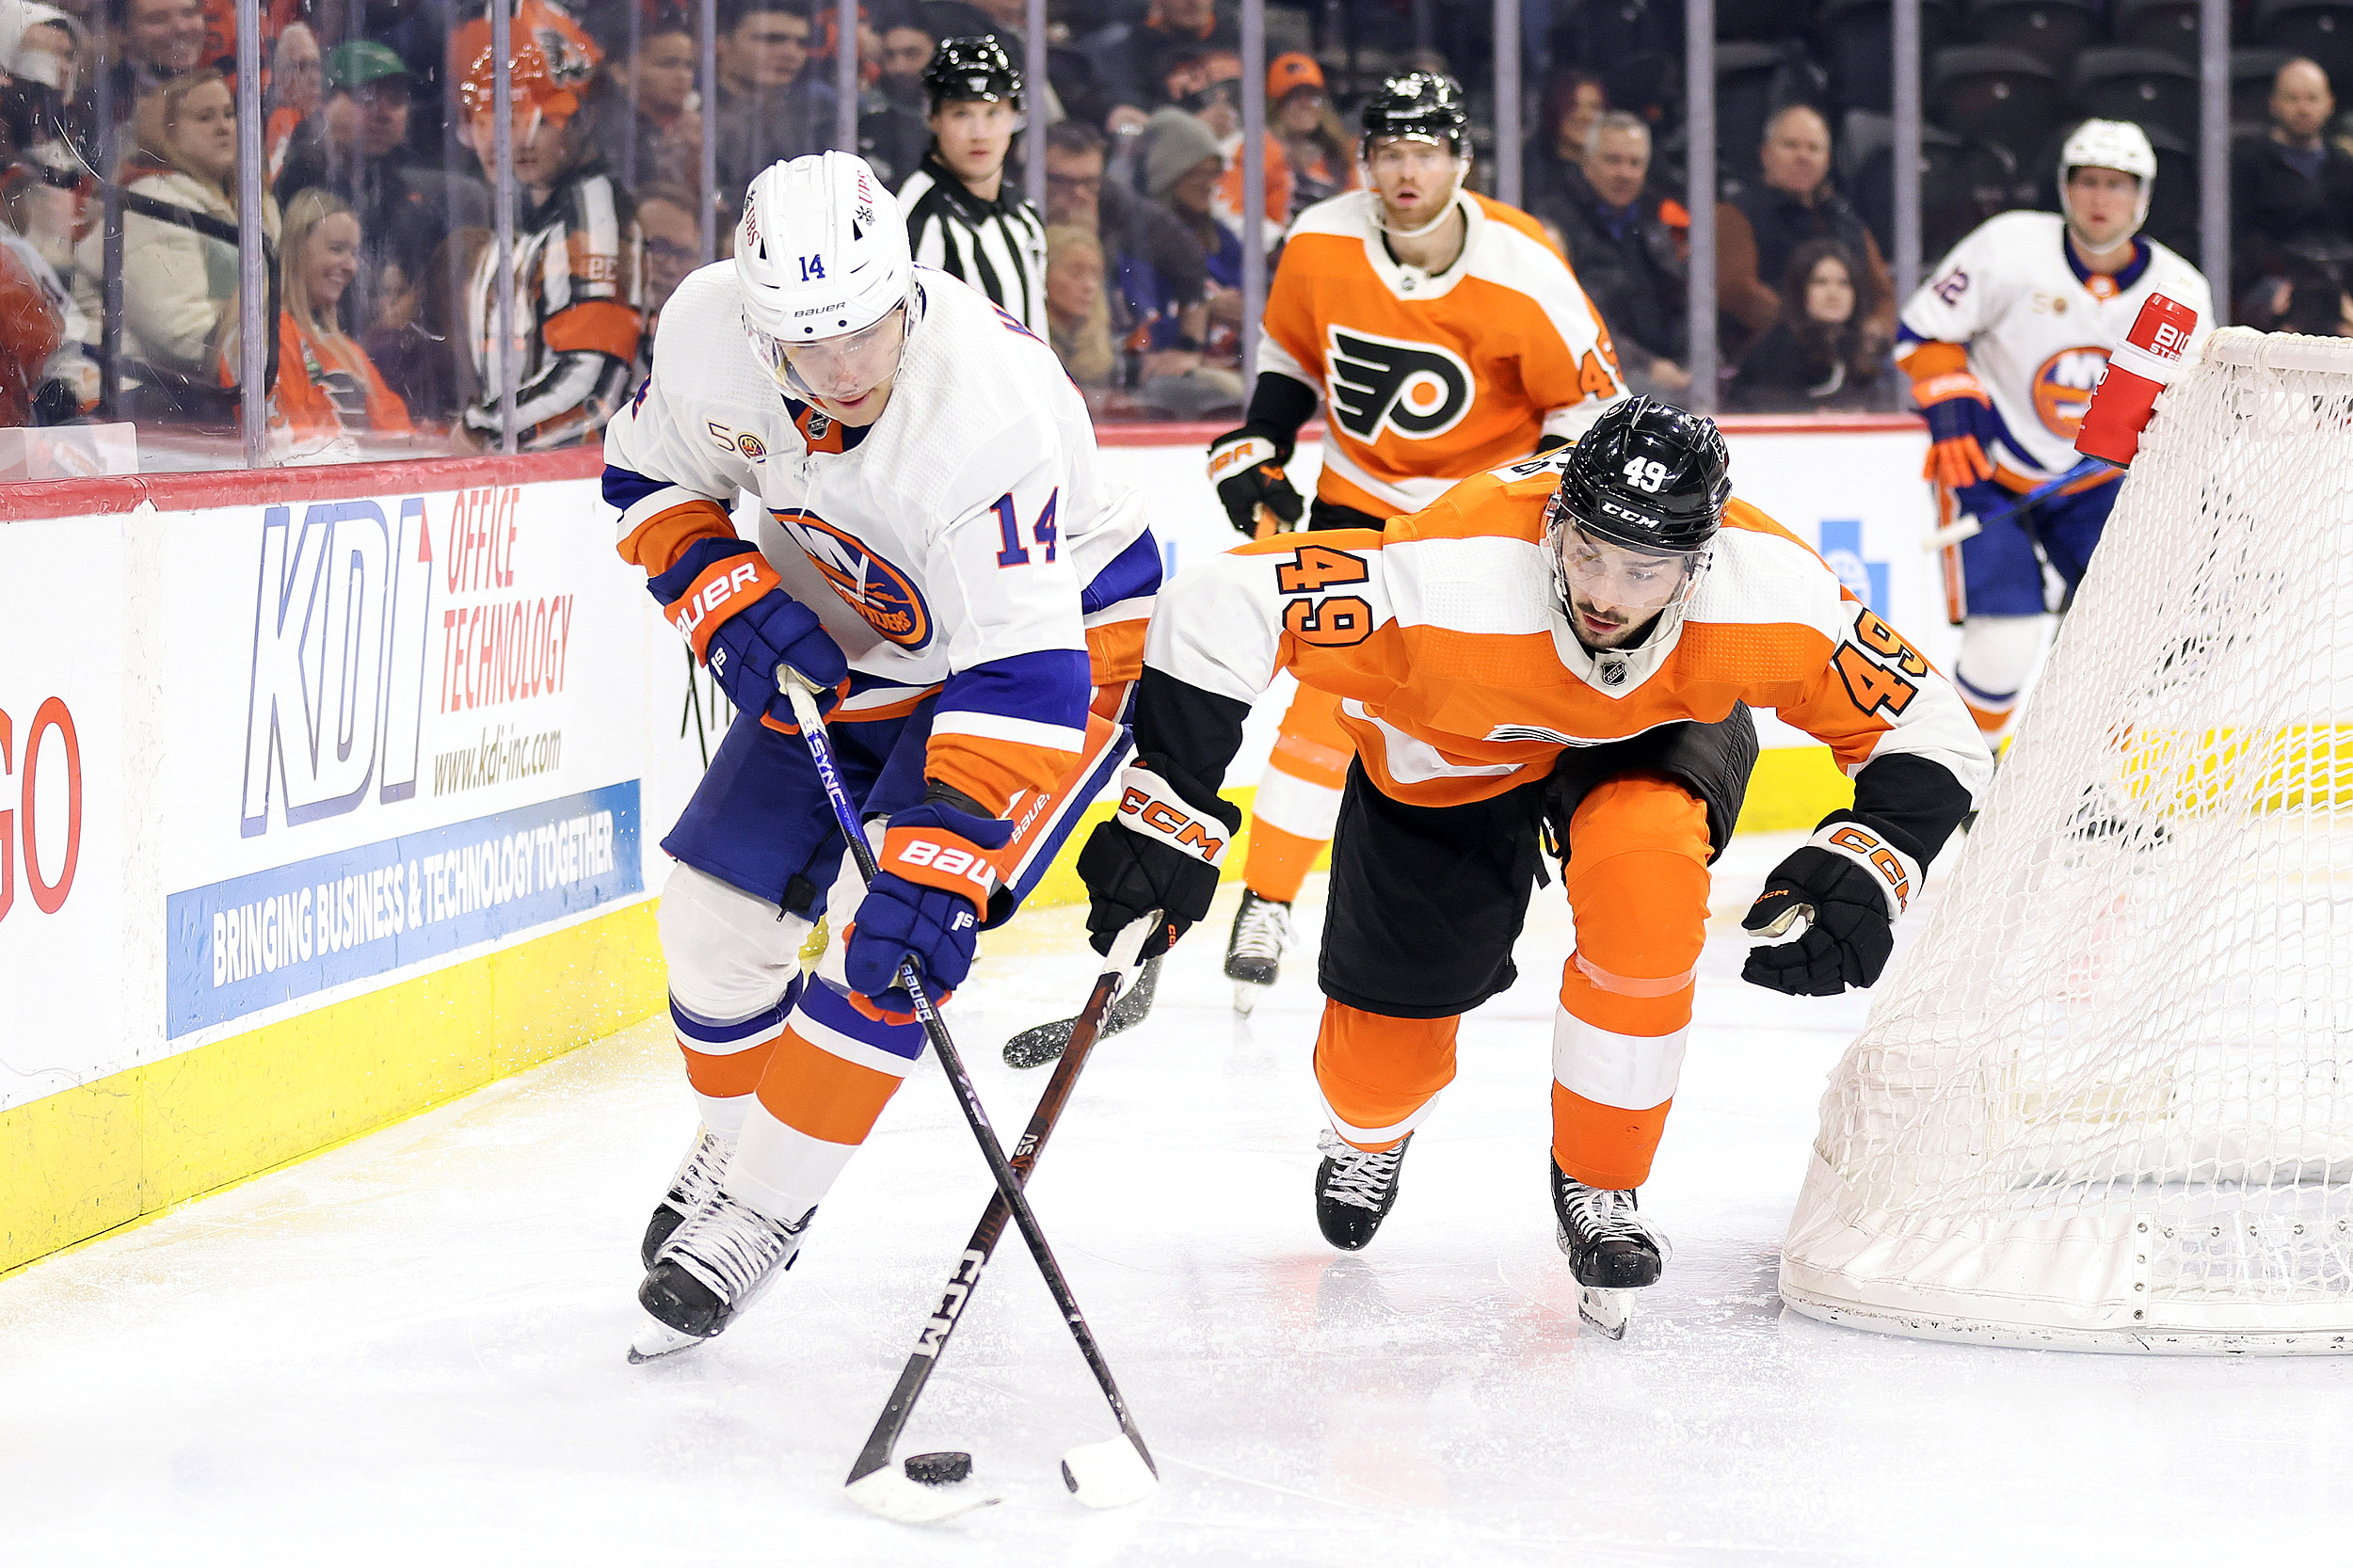 Reports: Flyers will not play NHL playoff game vs. Islanders